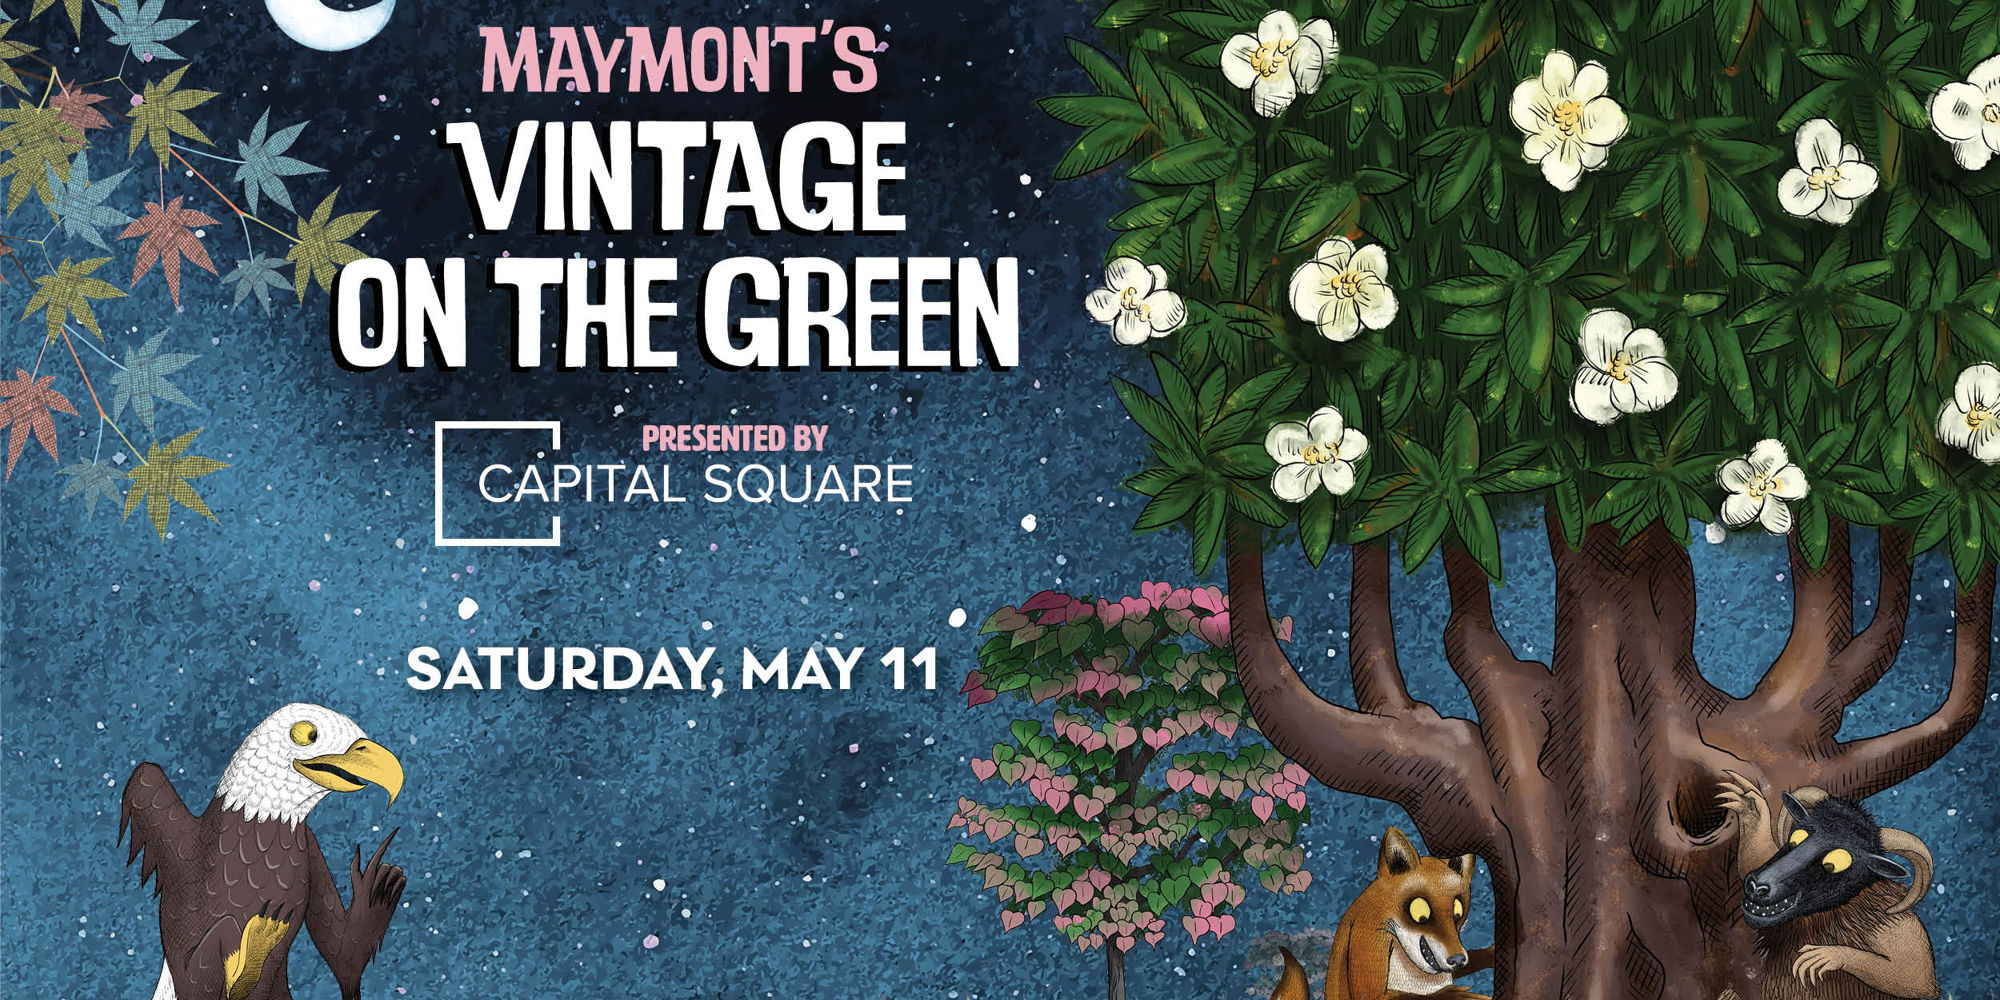 Vintage on the Green promotional image